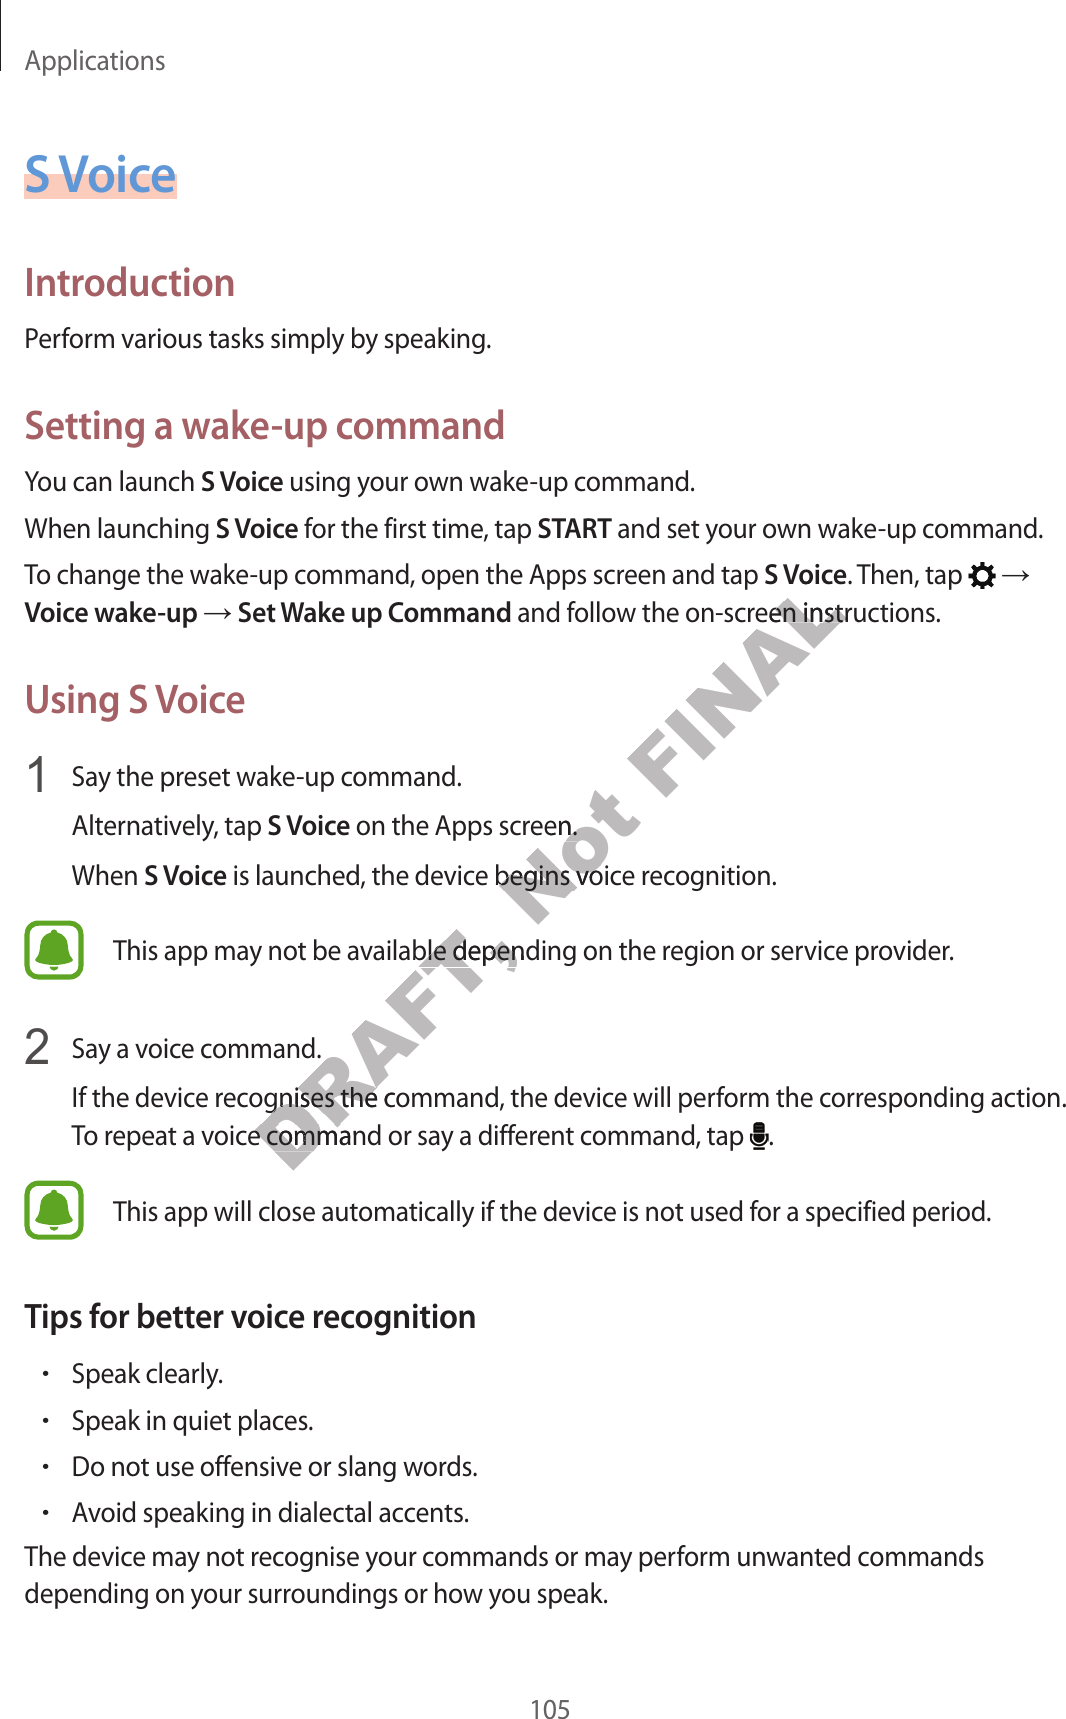 Applications105S V oiceIntroductionP erform various tasks simply by speaking.Setting a wake-up commandYou can launch S V oice using your own w ake-up command.When launching S V oice for the first time , tap START and set your own w ake-up command.To change the wake-up command, open the Apps scr een and tap S V oice. Then, tap    Voice wake-up  Set W ak e up C ommand and follo w the on-scr een instructions.Using S V oice1  Say the preset w ake-up command.Alternativ ely, tap S V oice on the Apps screen.When S V oice is launched, the device beg ins v oic e r ecog nition.This app may not be a vailable depending on the r eg ion or service provider.2  Say a voic e command .If the device recog nises the command , the devic e will perform the corr esponding action. To repeat a v oic e command or sa y a diff er en t command , tap  .This app will close automatically if the devic e is not used f or a specified period .T ips f or bett er v oic e r ec ognition•Speak clearly.•Speak in quiet places.•Do not use offensiv e or slang w or ds .•A v oid speaking in dialectal accents .The device ma y not r ecog nise y our c ommands or may perform unwant ed c ommands depending on your surroundings or ho w y ou speak.DRAFT, This app may not be a vailable depending on the r eg ion or service provider.DRAFT, This app may not be a vailable depending on the r eg ion or service provider.Say a voic e command .DRAFT, Say a voic e command .If the device recog nises the command , the devic e will perform the corr esponding action. DRAFT, If the device recog nises the command , the devic e will perform the corr esponding action. To repeat a v oic e command or sa y a diff er en t command , tap DRAFT, To repeat a v oic e command or sa y a diff er en t command , tap Not  on the Apps screen.Not  on the Apps screen. is launched, the device beg ins v oic e r ecog nition.Not  is launched, the device beg ins v oic e r ecog nition.FINALS V oiceFINALS V oice and follo w the on-scr een instructions.FINAL and follo w the on-scr een instructions.